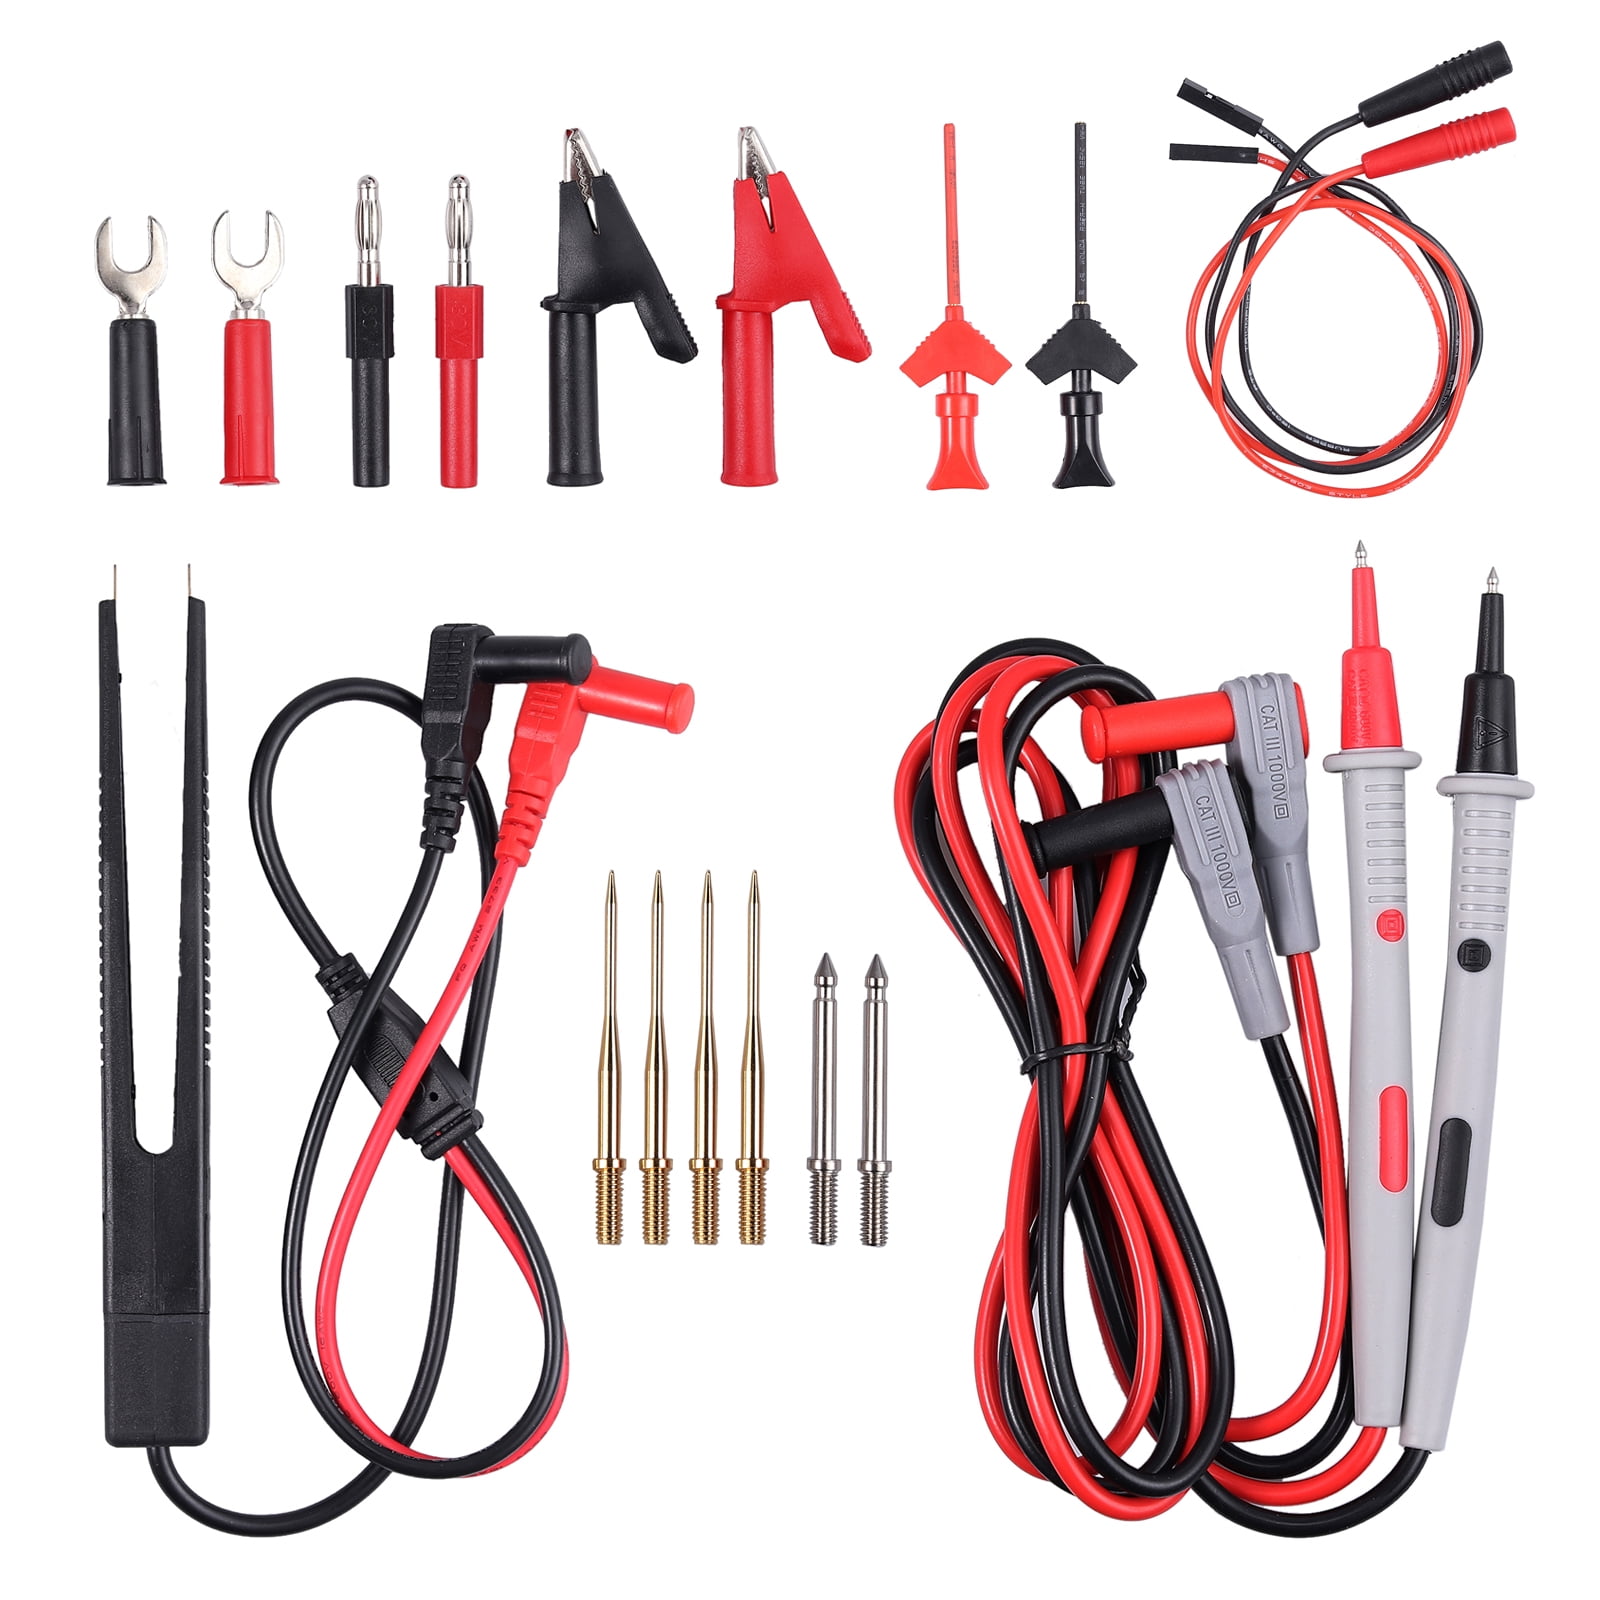 Test Probe 18-in-1 Electrical Multimeter Test Lead With Alligator Clips Professional Volt Meter Leads For Voltage Circuit Tester Spring Grabber,Test Extension Lead Sumnacon Multi Test Leads Kit 